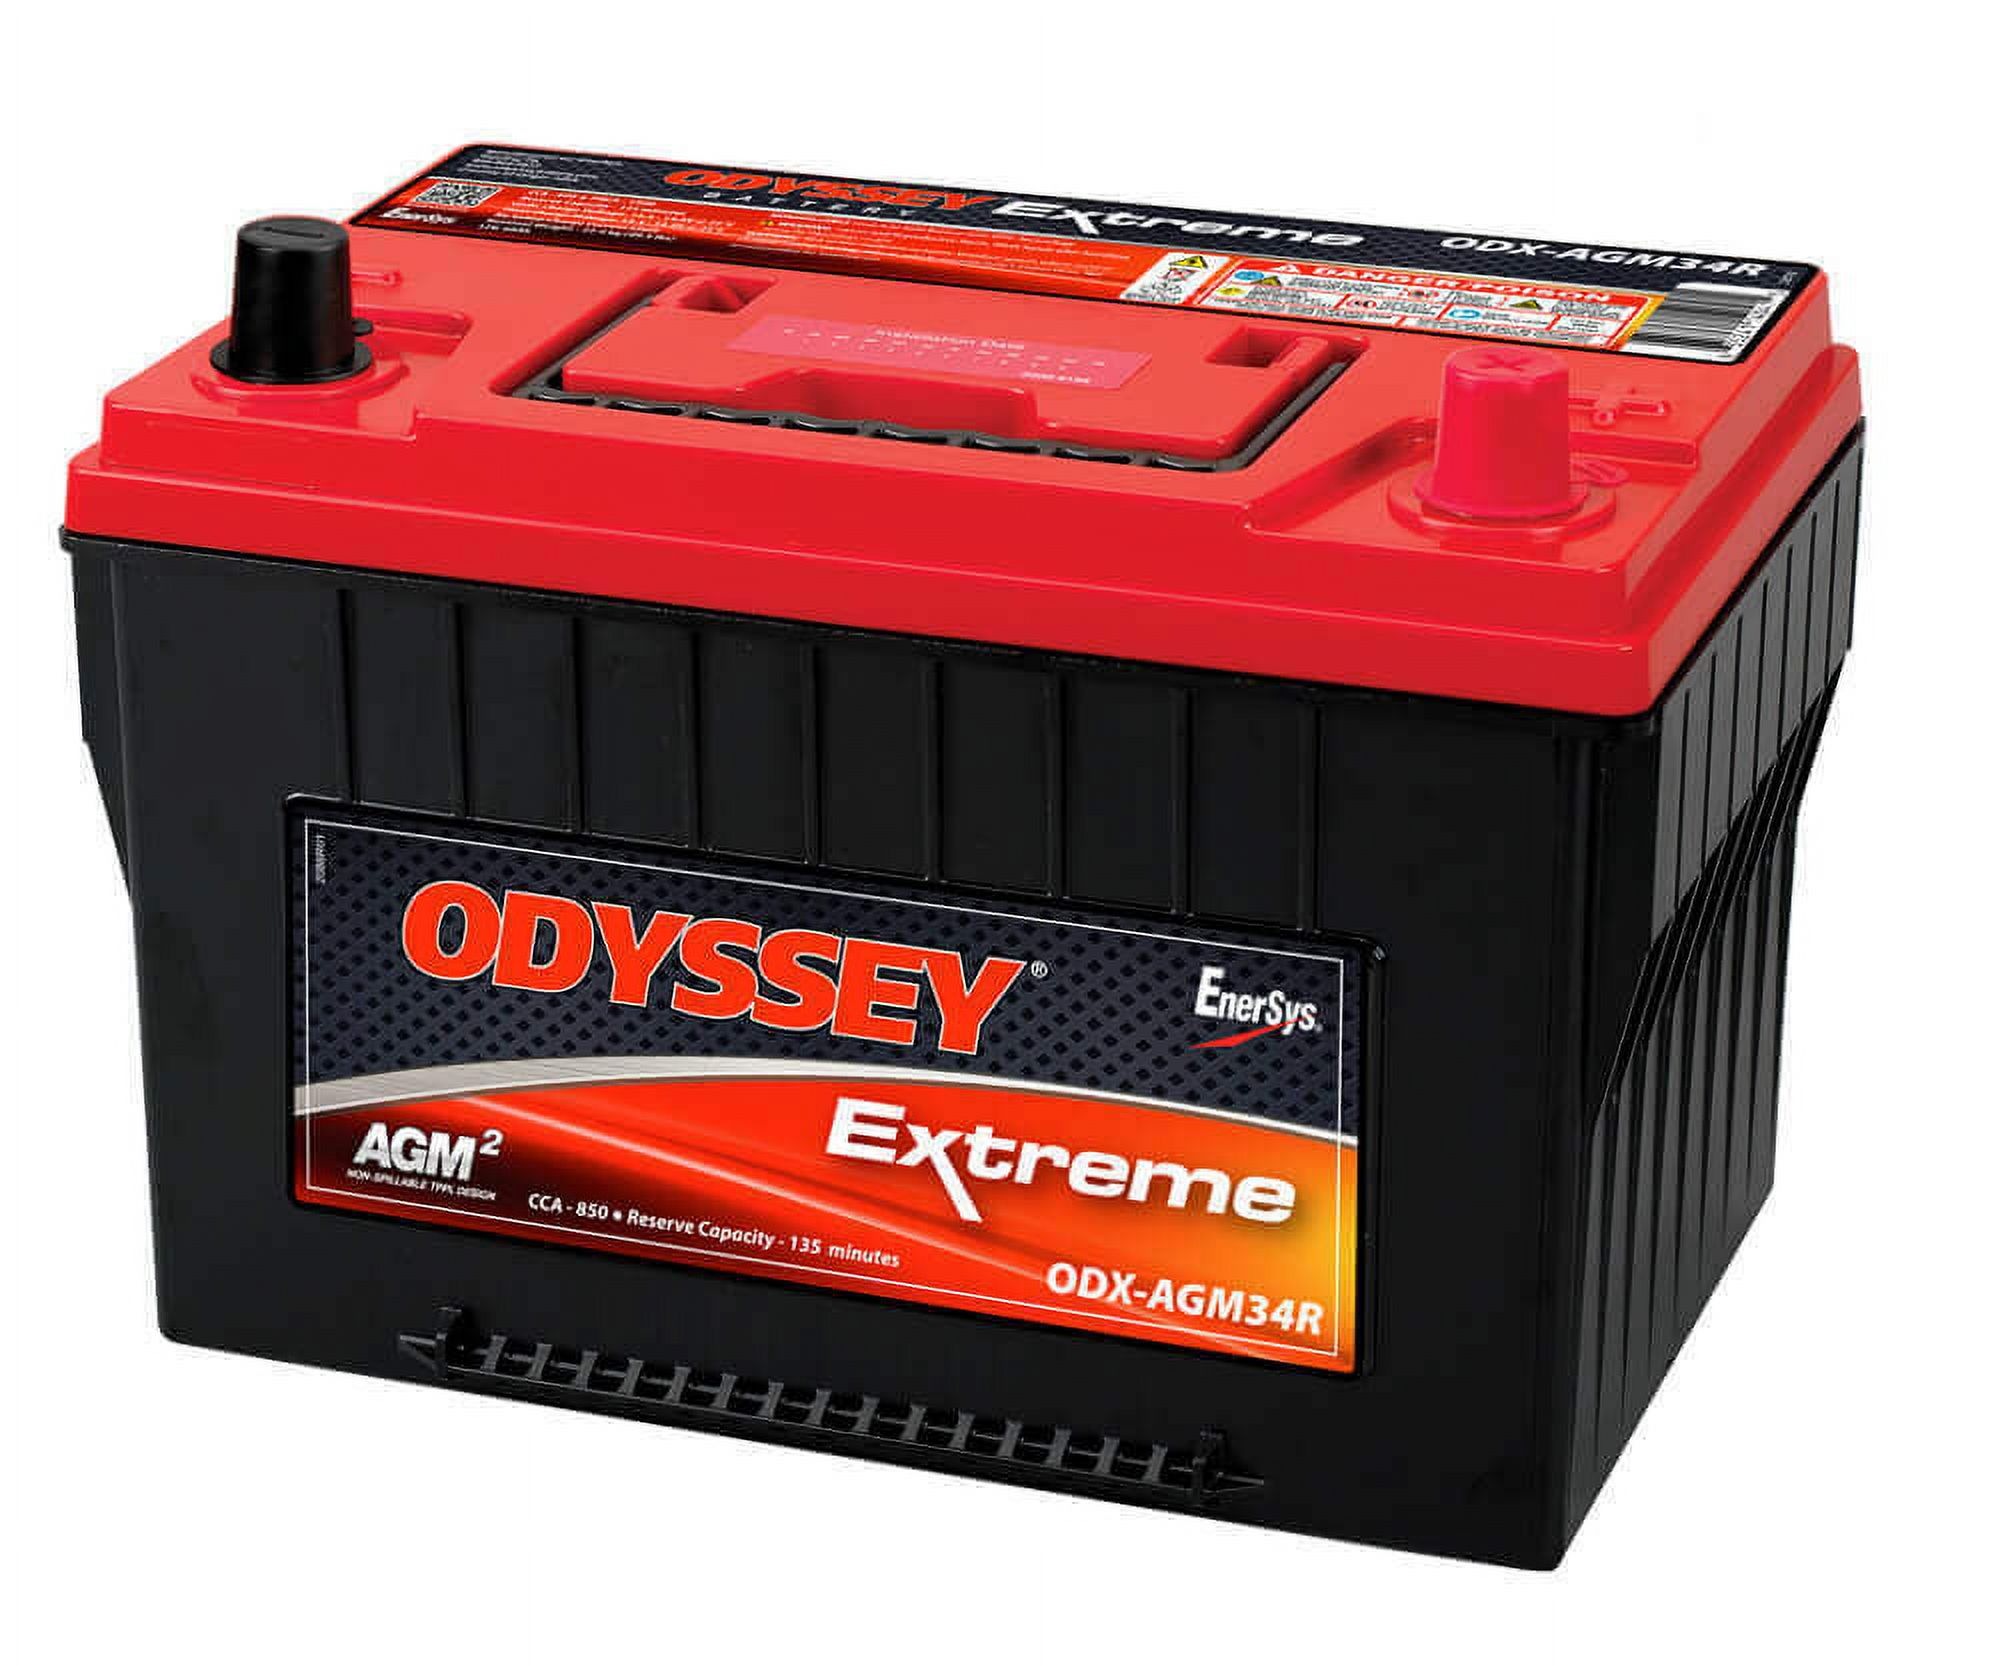 ODYSSEY Extreme Battery - ODX-AGM34R (34R-PC1500) - image 2 of 3